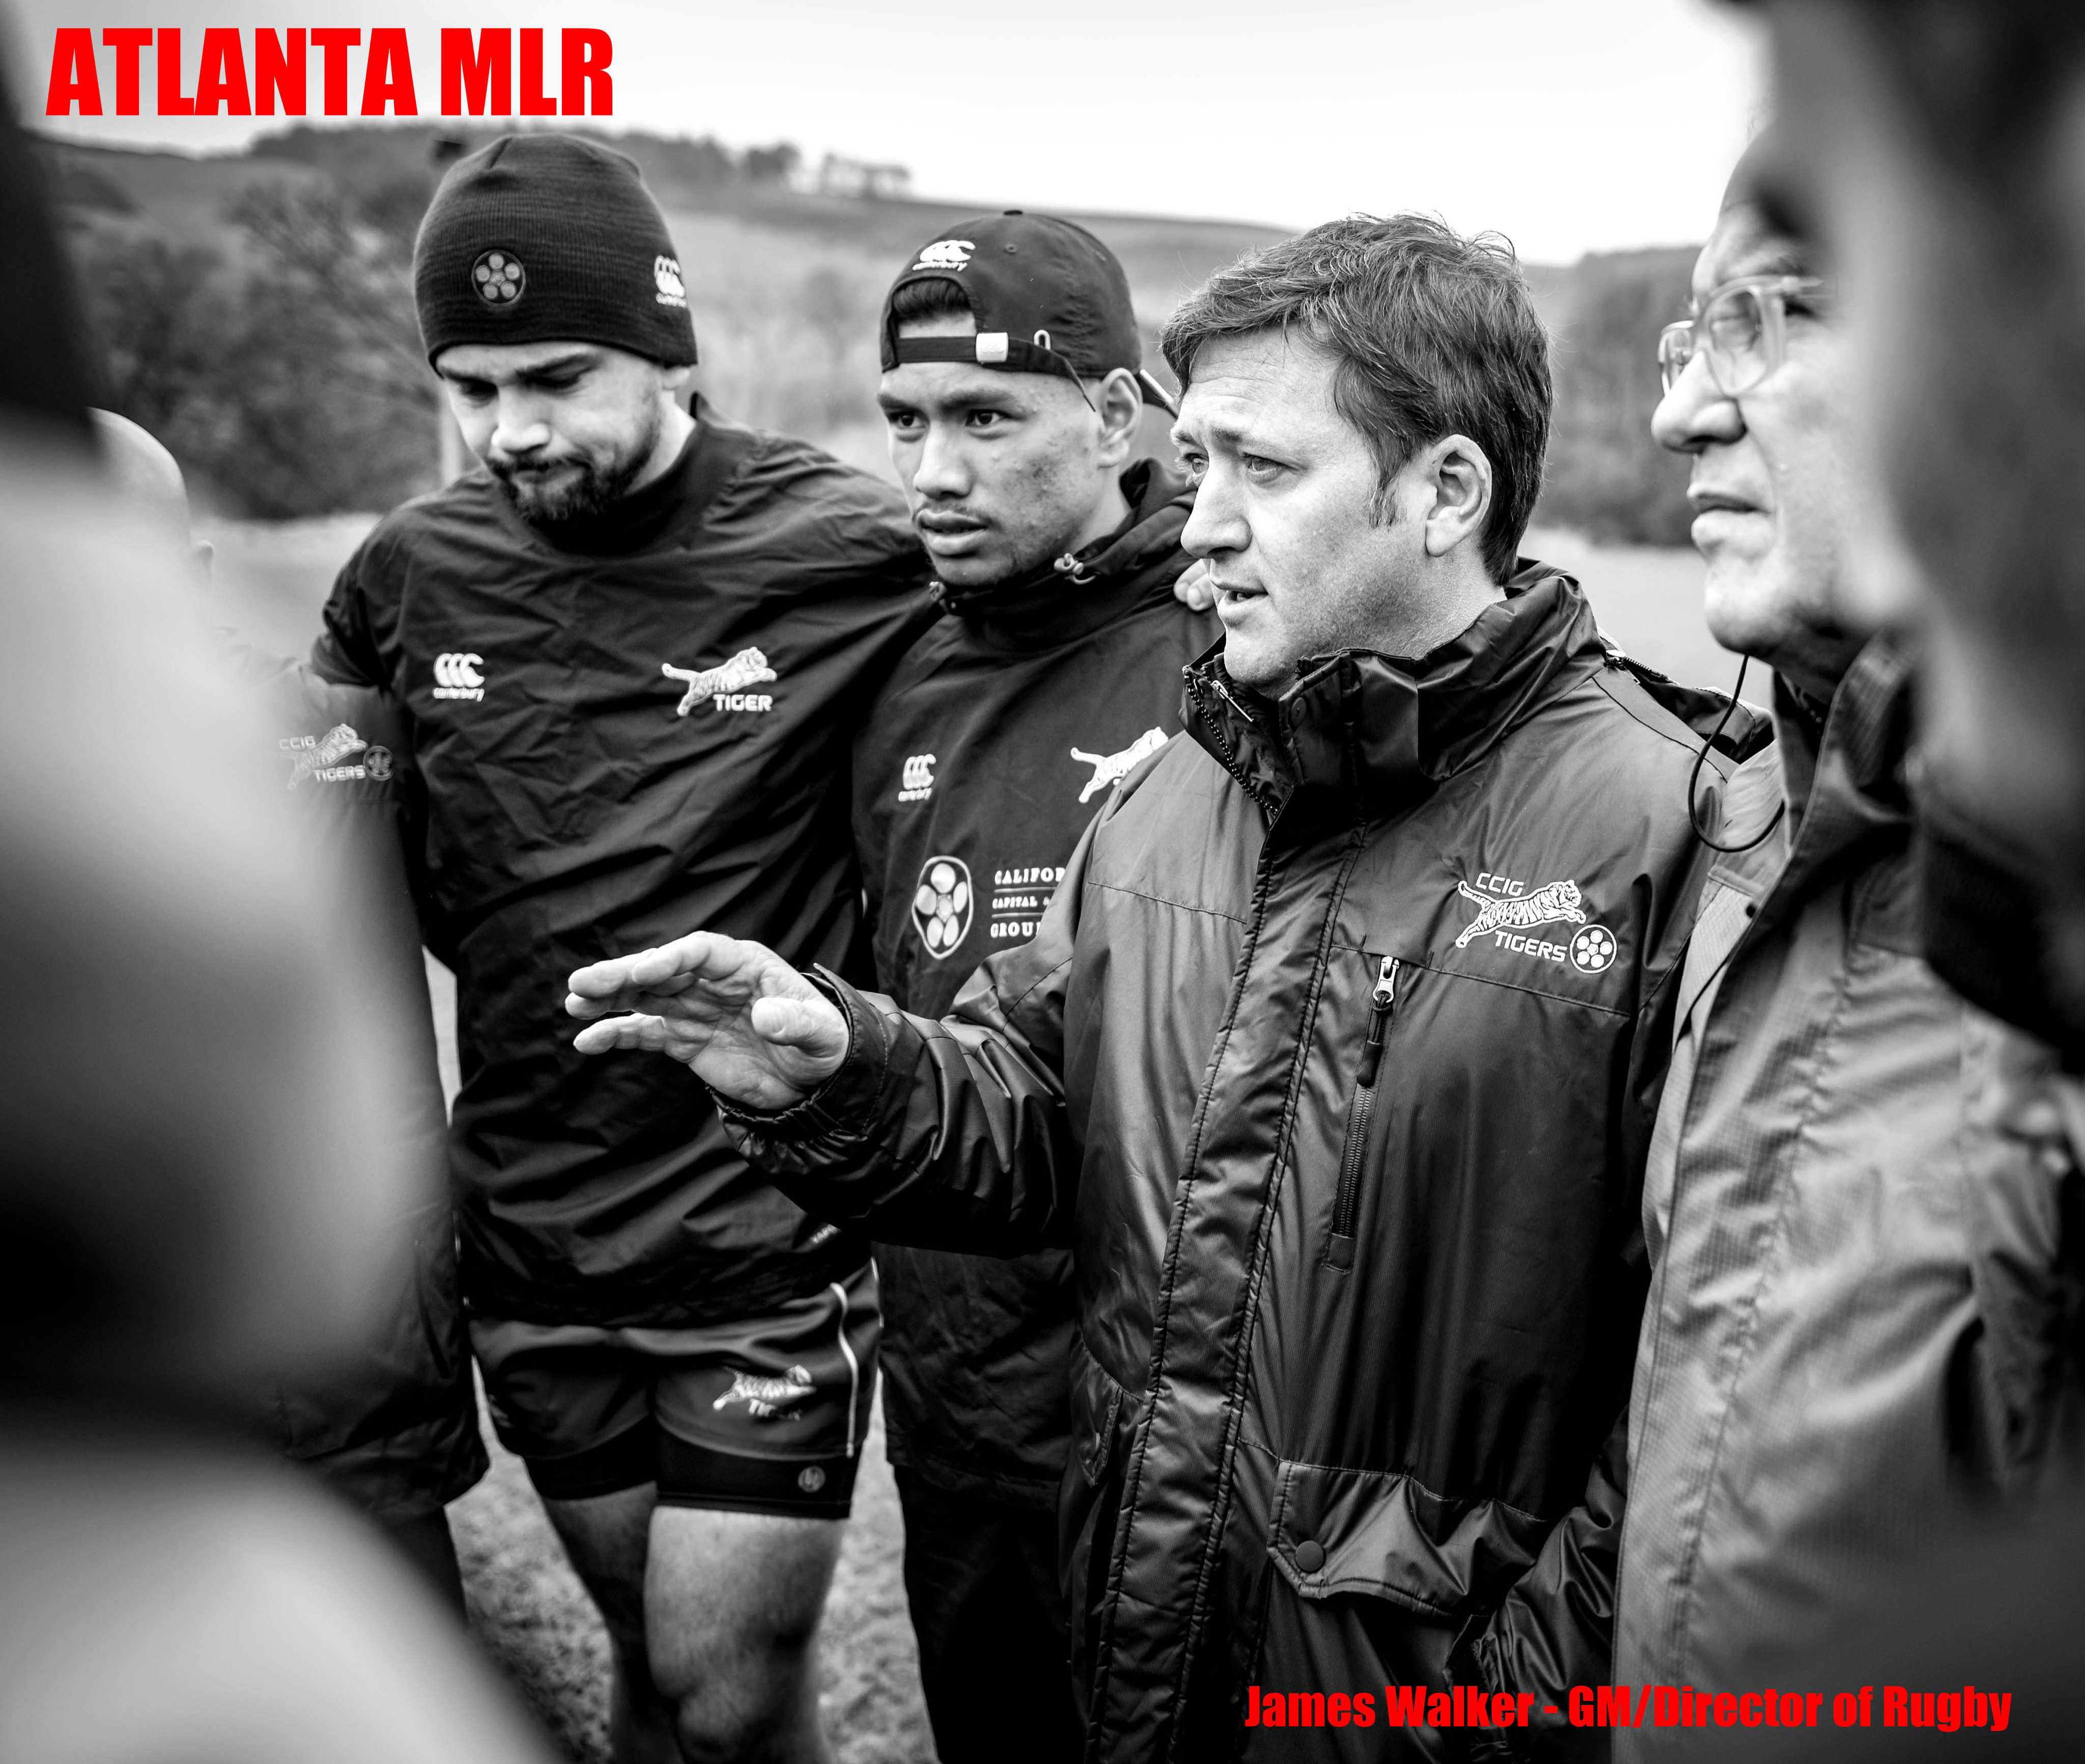 Major League Rugby Atlanta Entry Tabs James Walker of Tiger Rugby as GM, Director of Rugby, Rugby_Wrap_Up